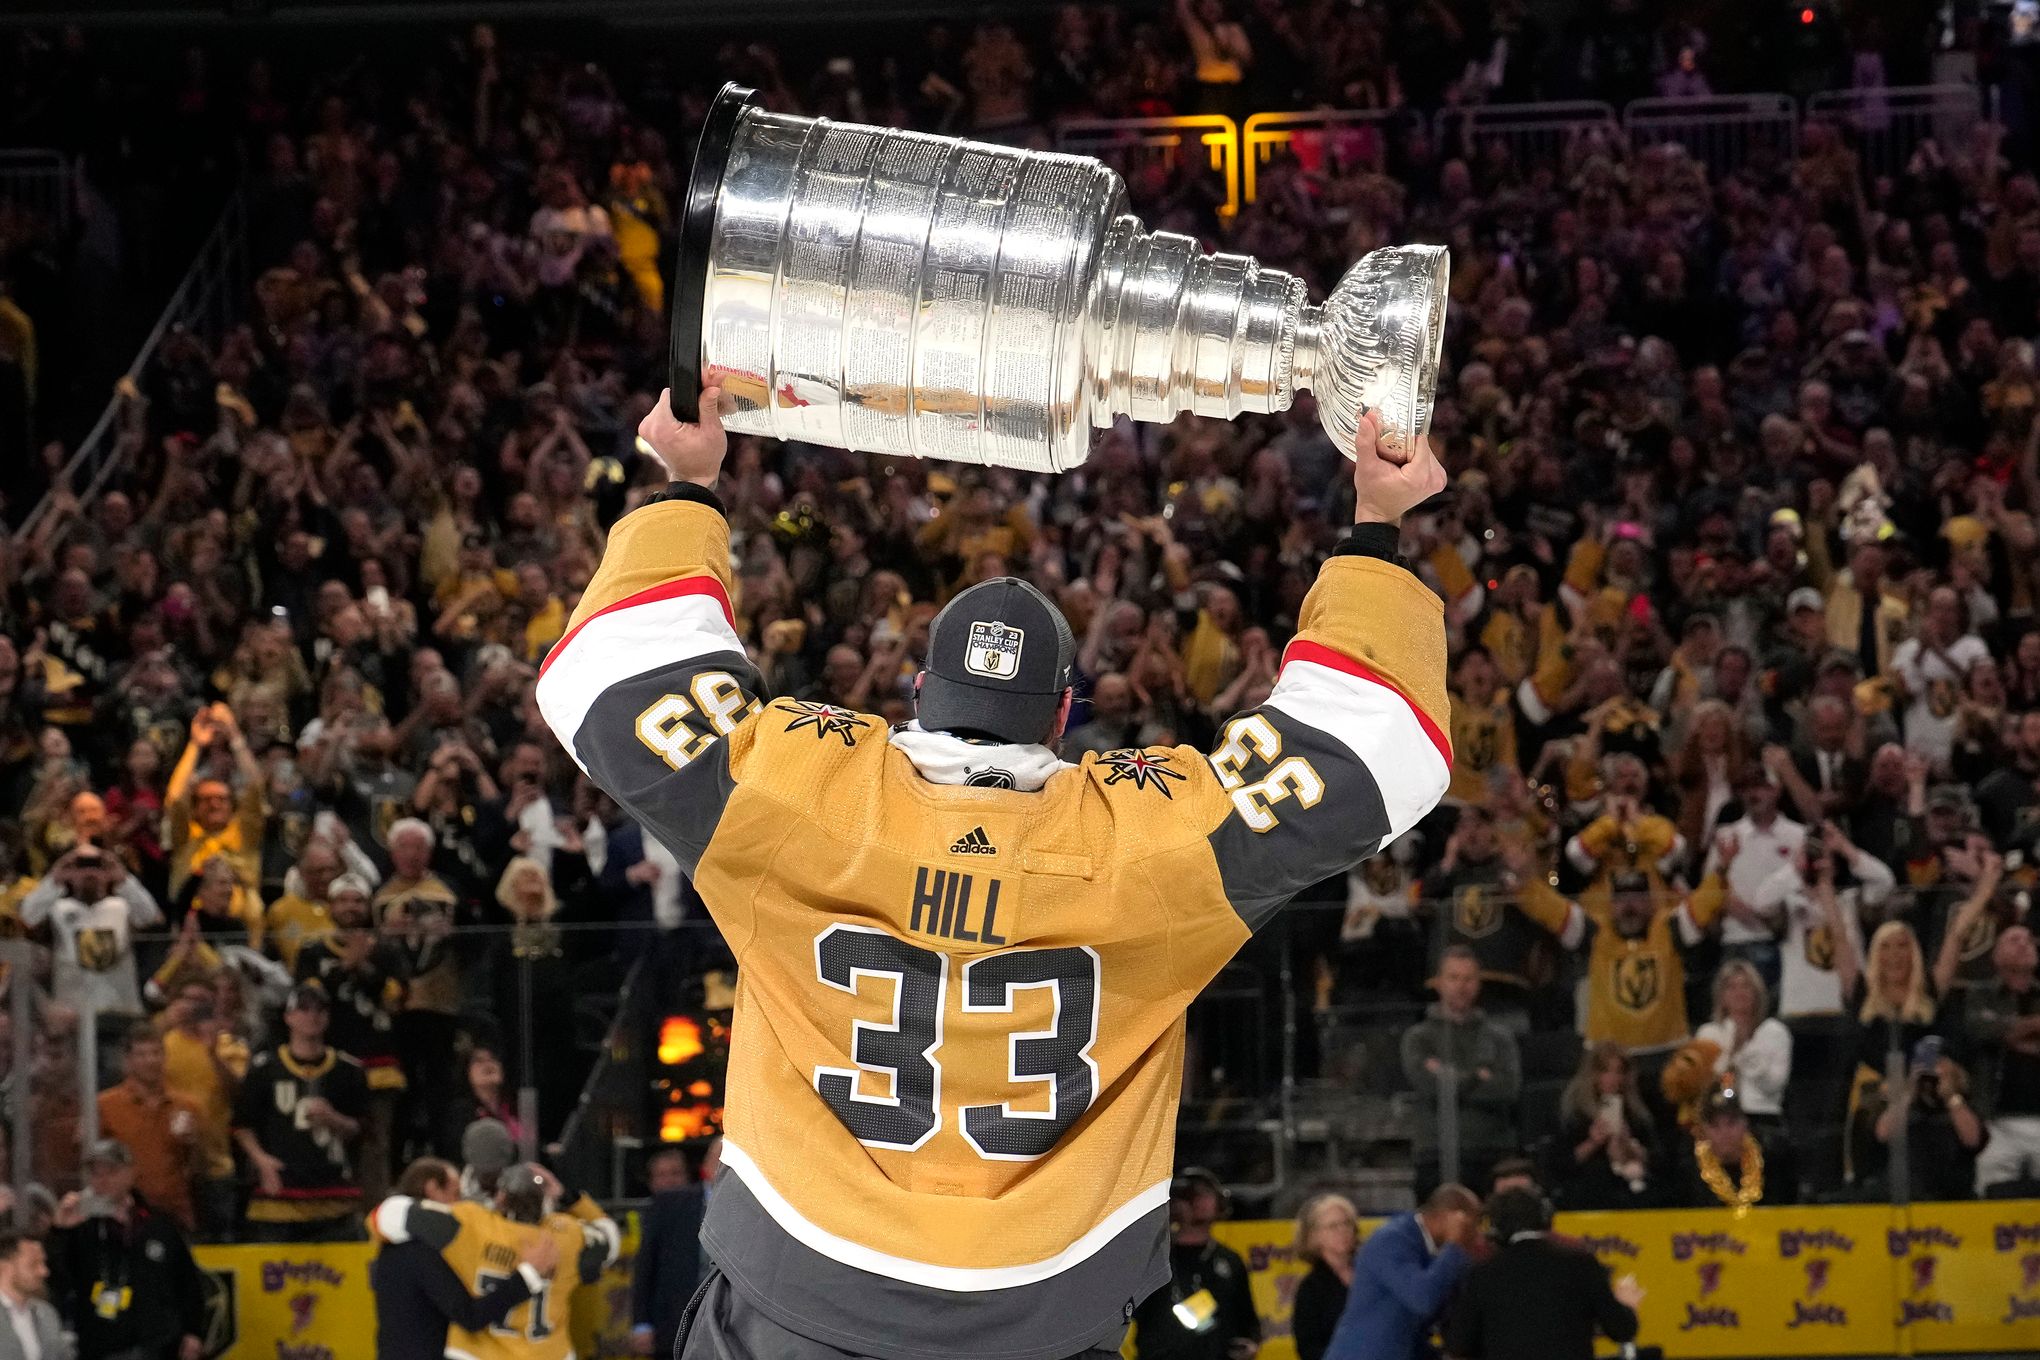 Golden Knights awarded with Stanley Cup championship rings - Las